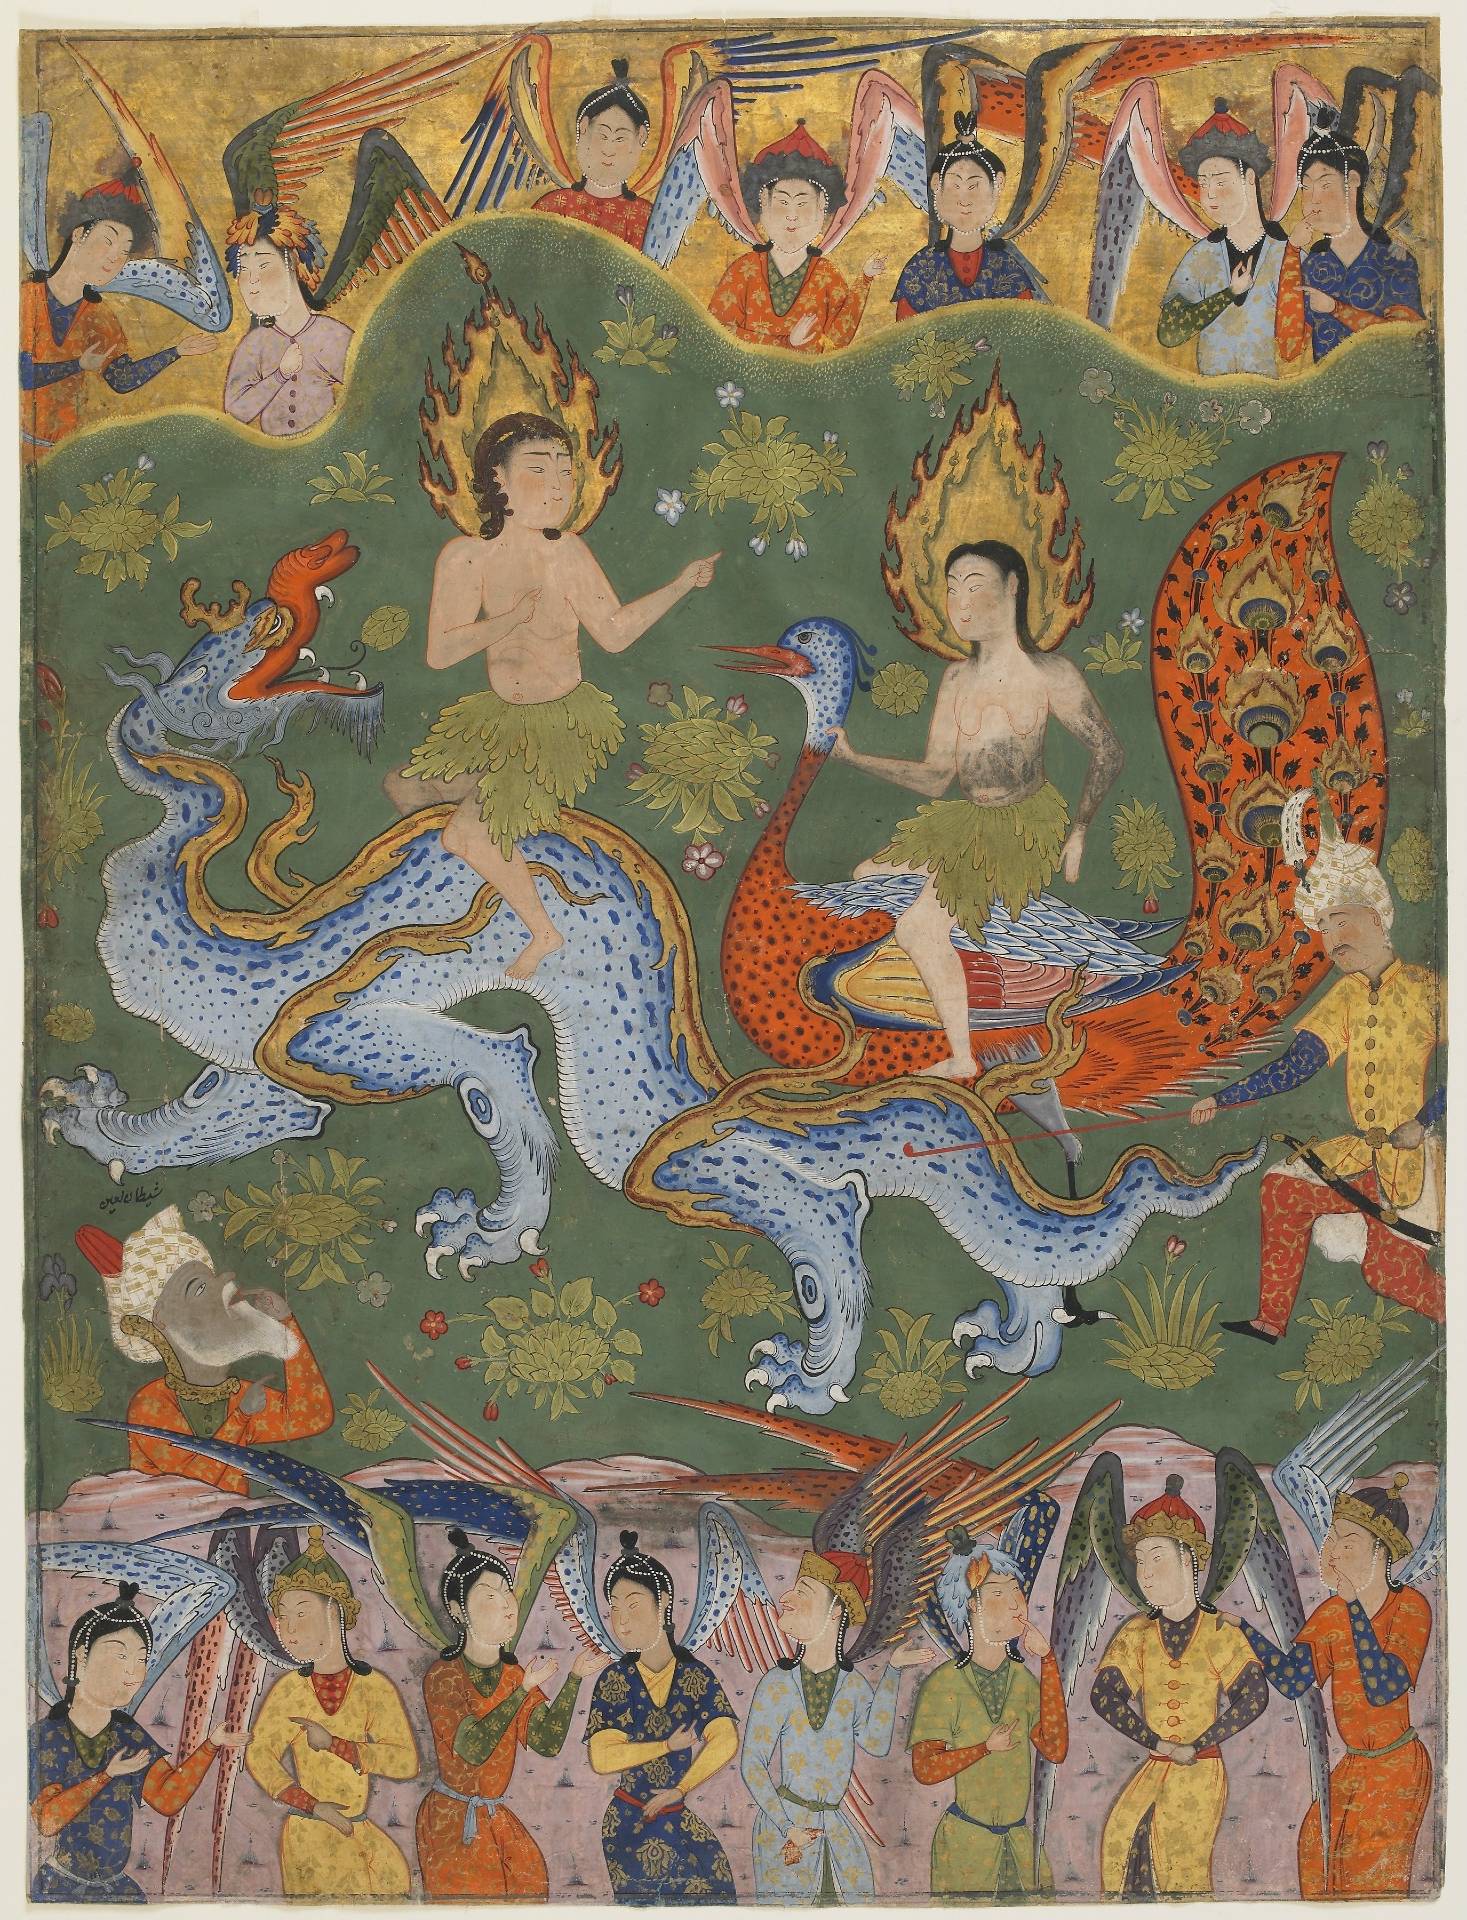 Iblis was said to have been brought up with the angels after he was captured in a battle on earth before humans existence (Unknown artist, Book of Omens, Falnama, Public Domain)